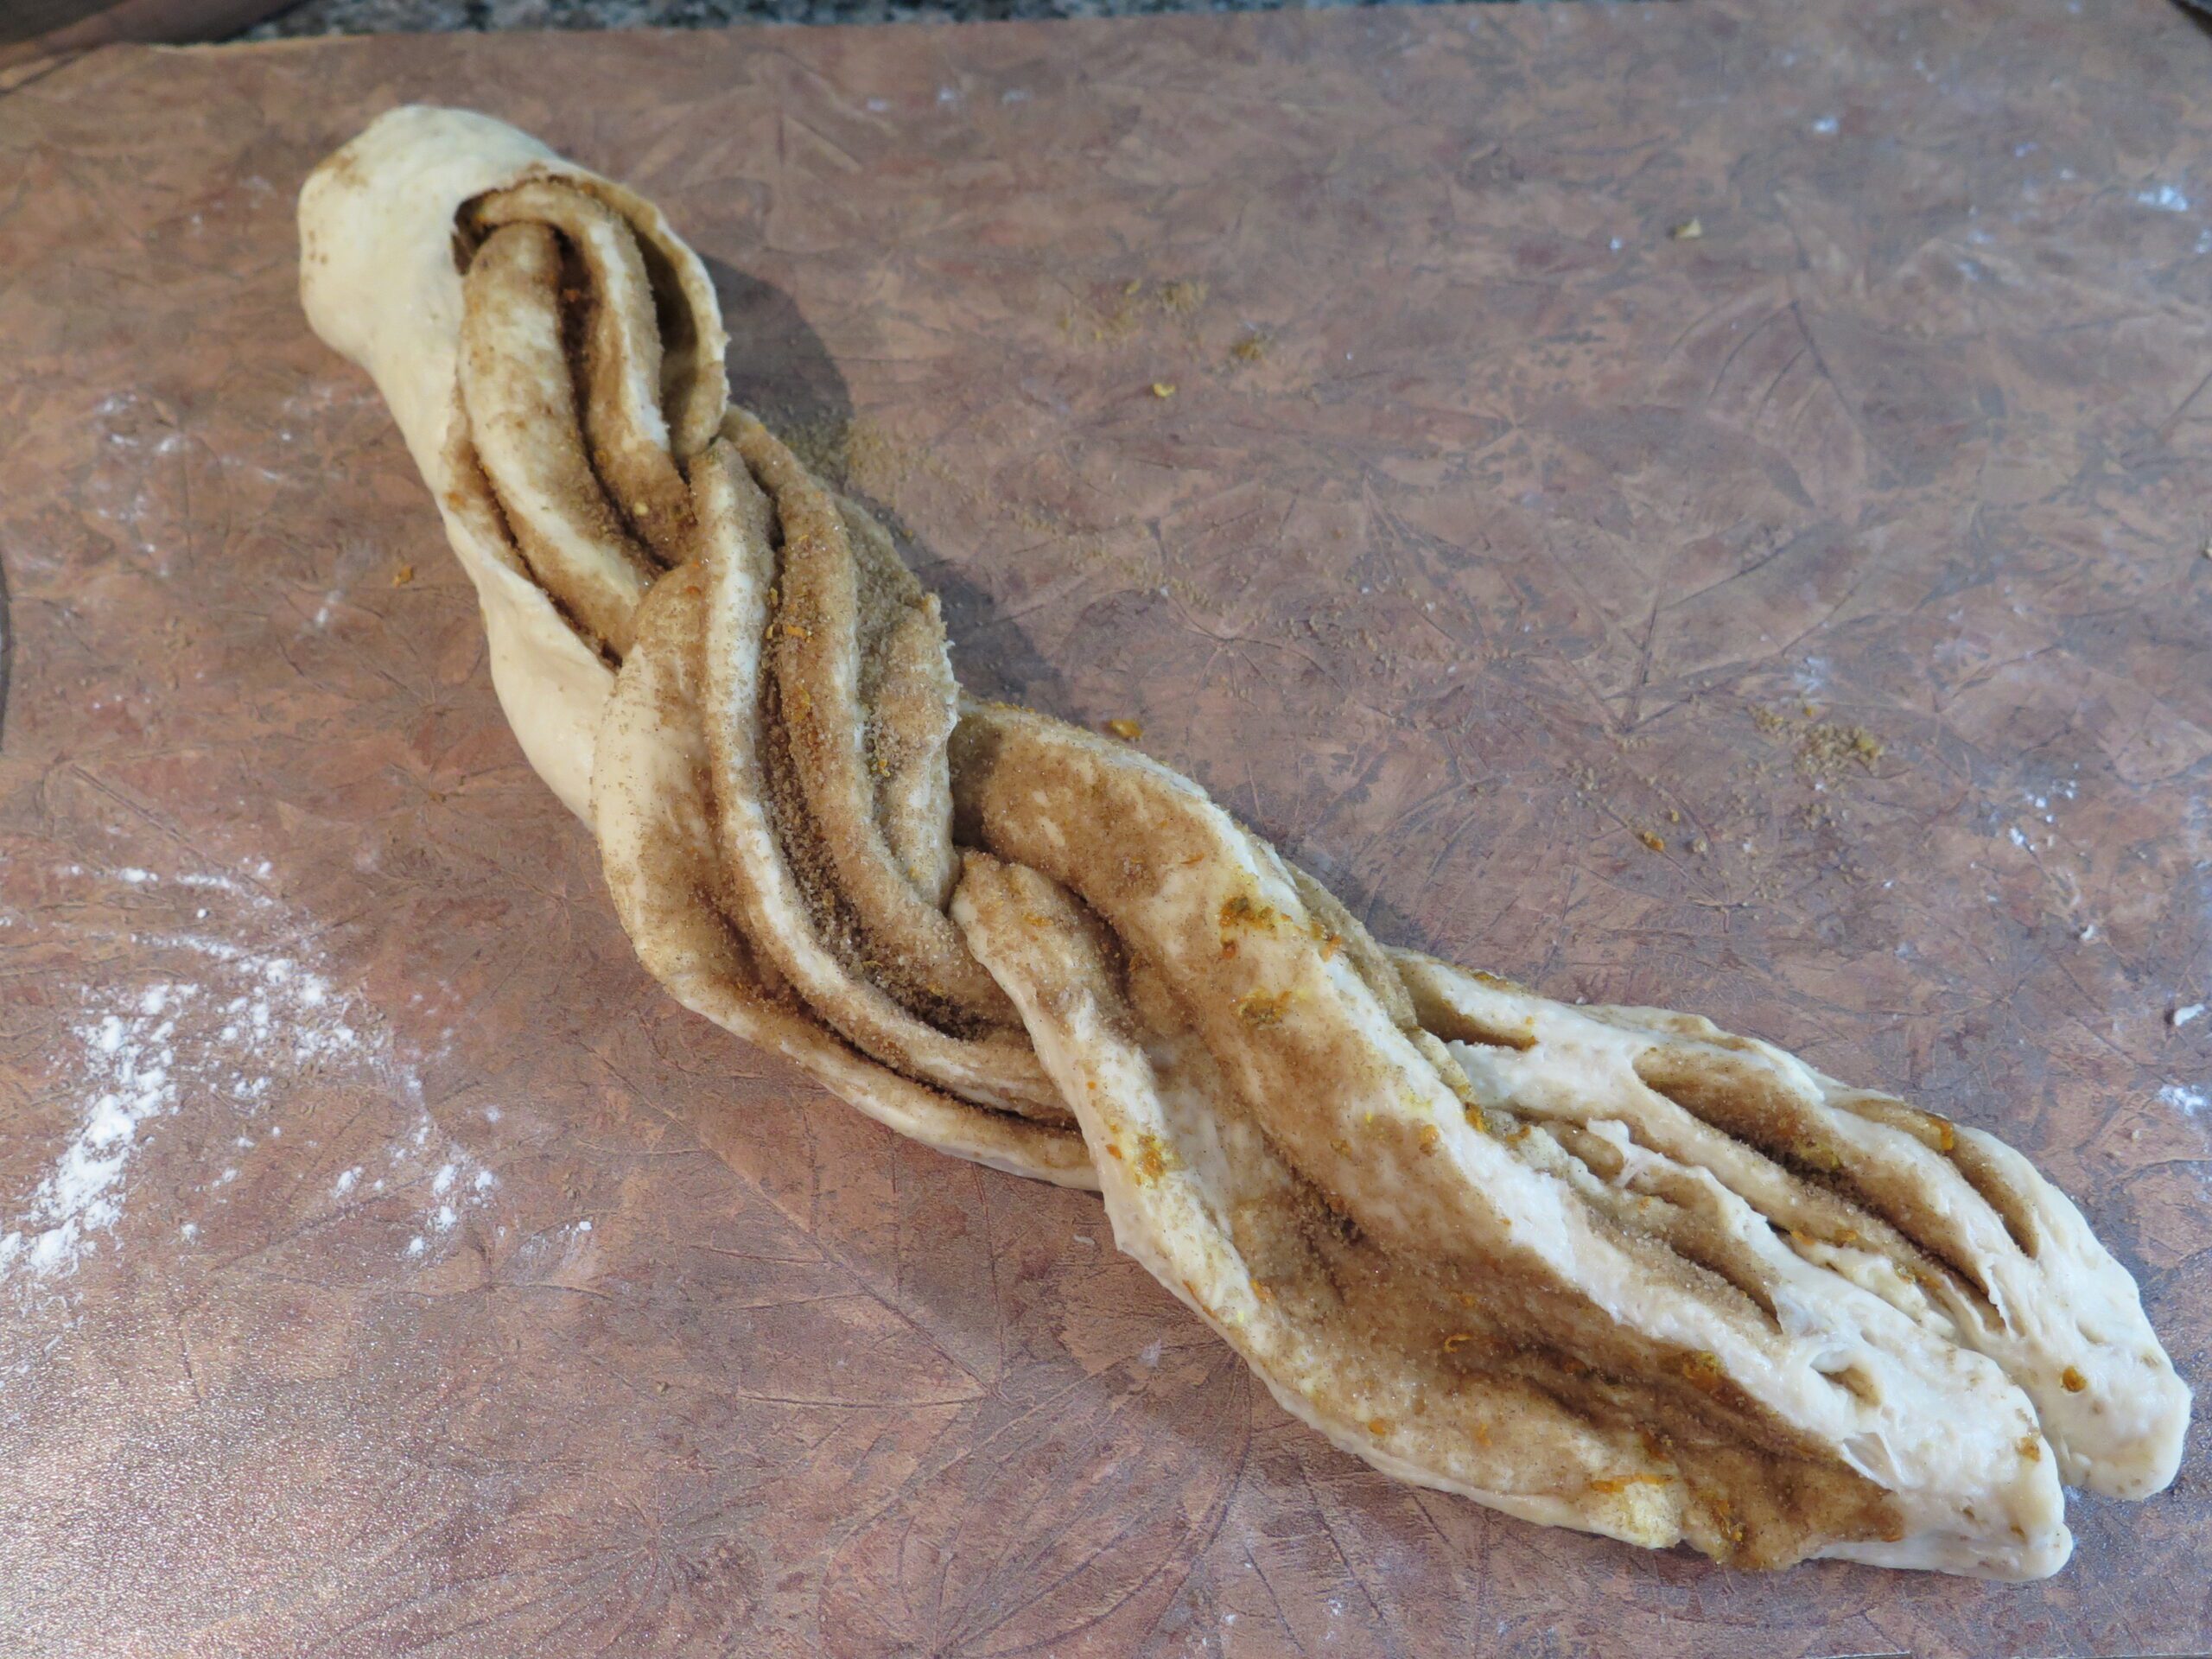 Length of dough twisted